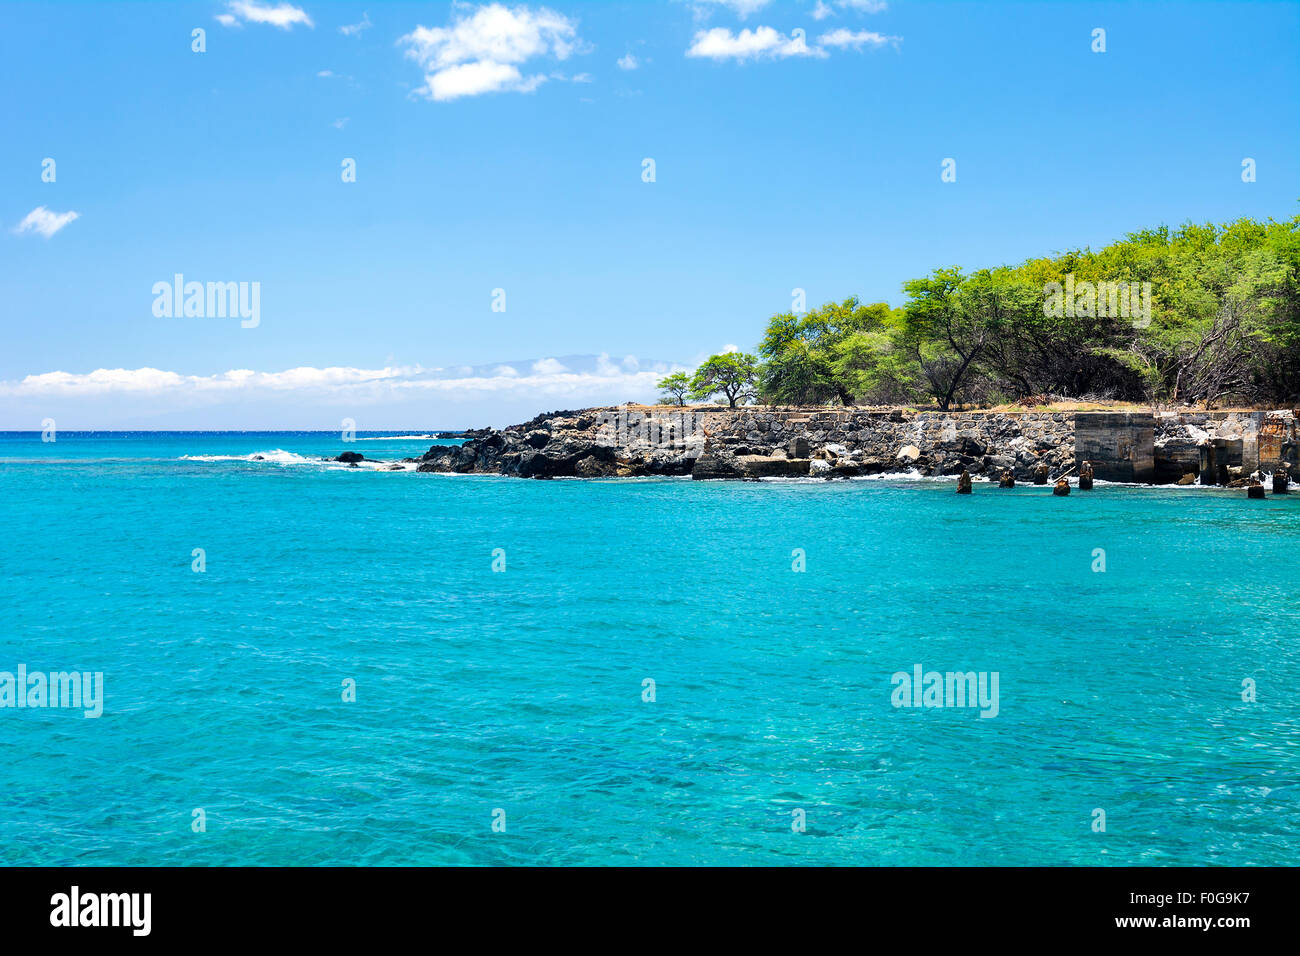 A small swimming bay used by local residents to beat the summer hear in Hawaii Stock Photo